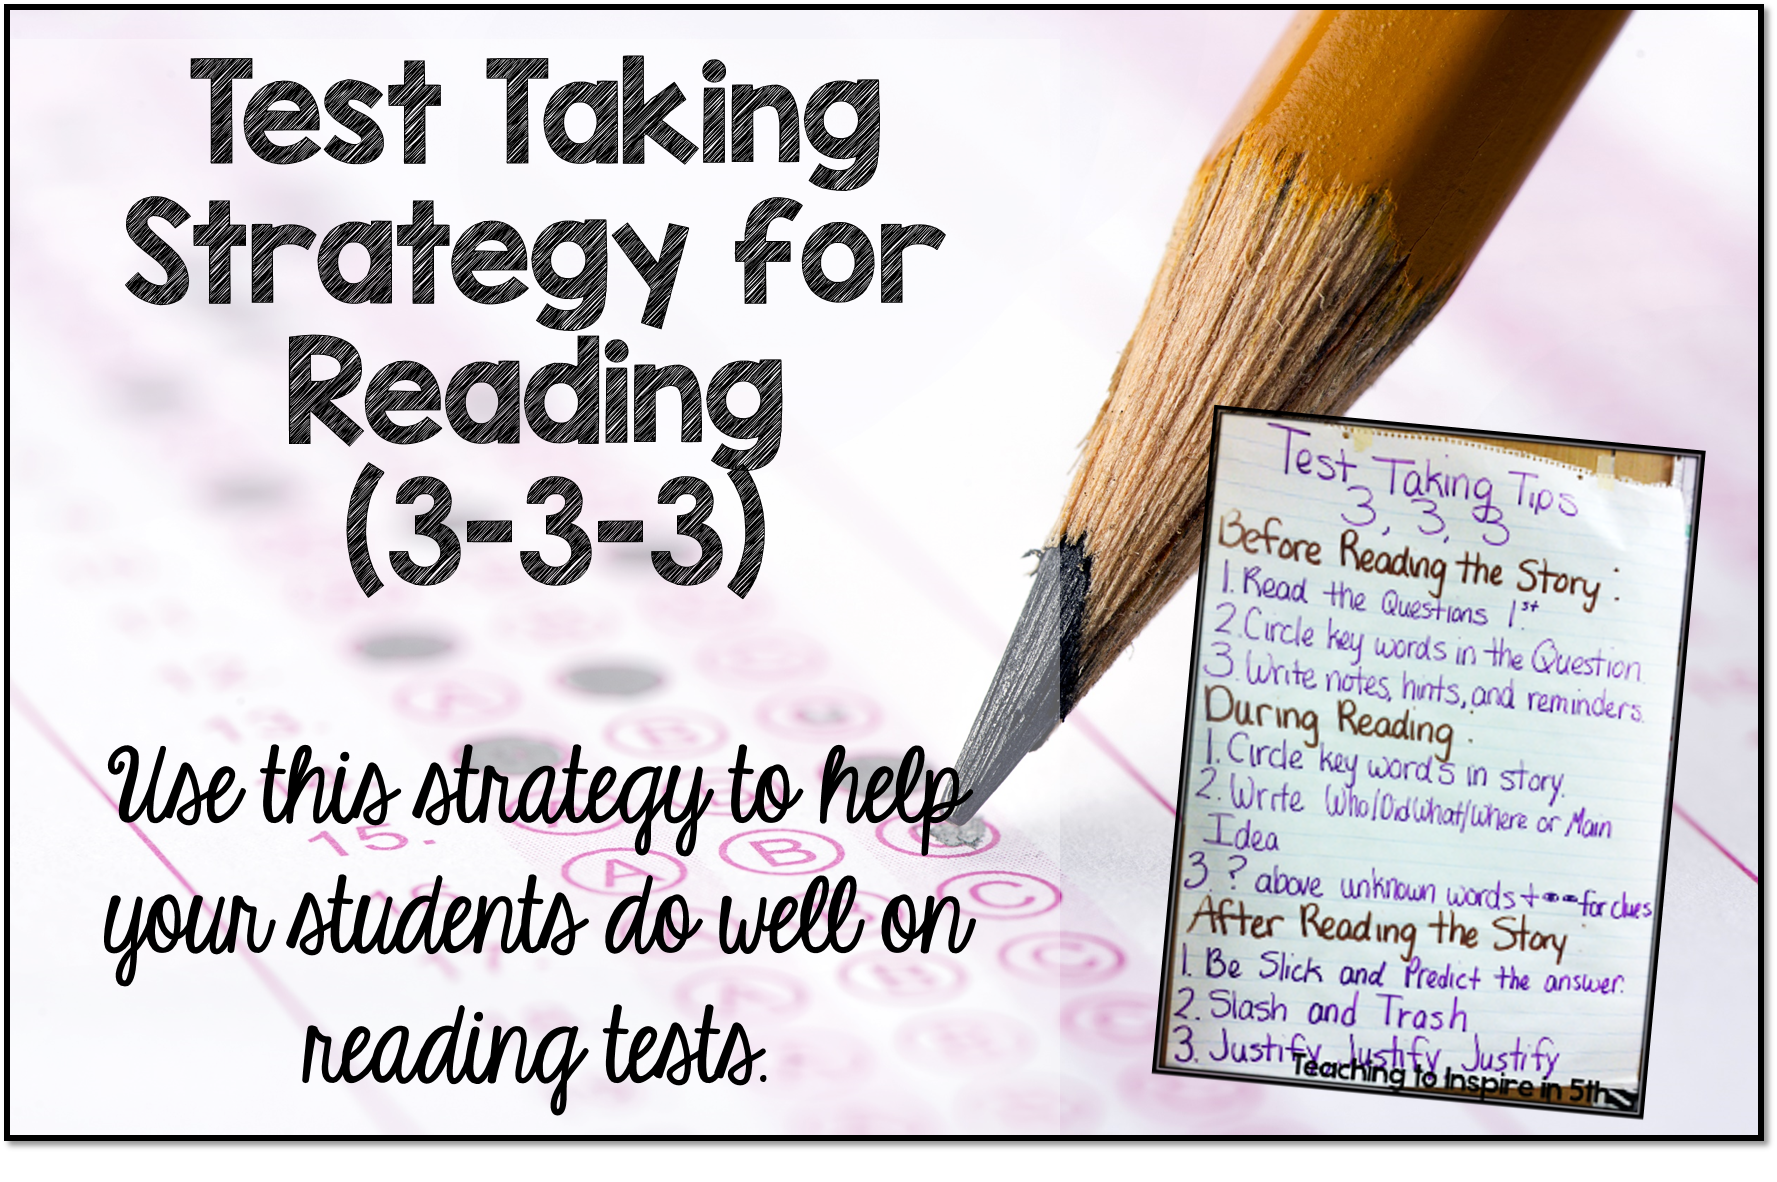 Students for reading tips 20 Effective